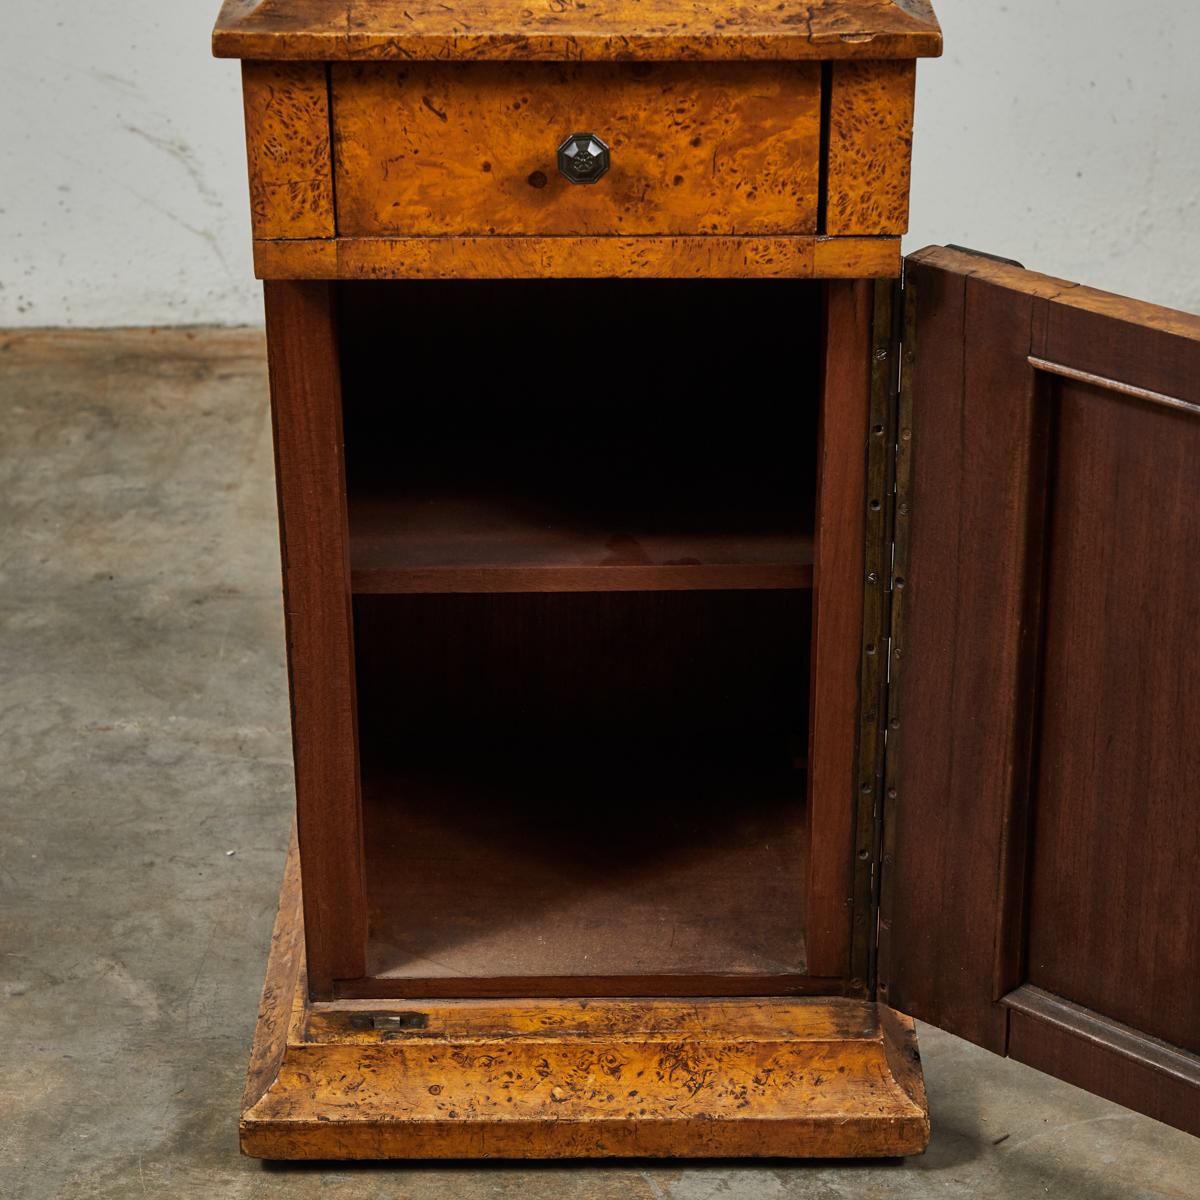 English Mid-19th Century Burl Wood Stand with Black Marble Top from England